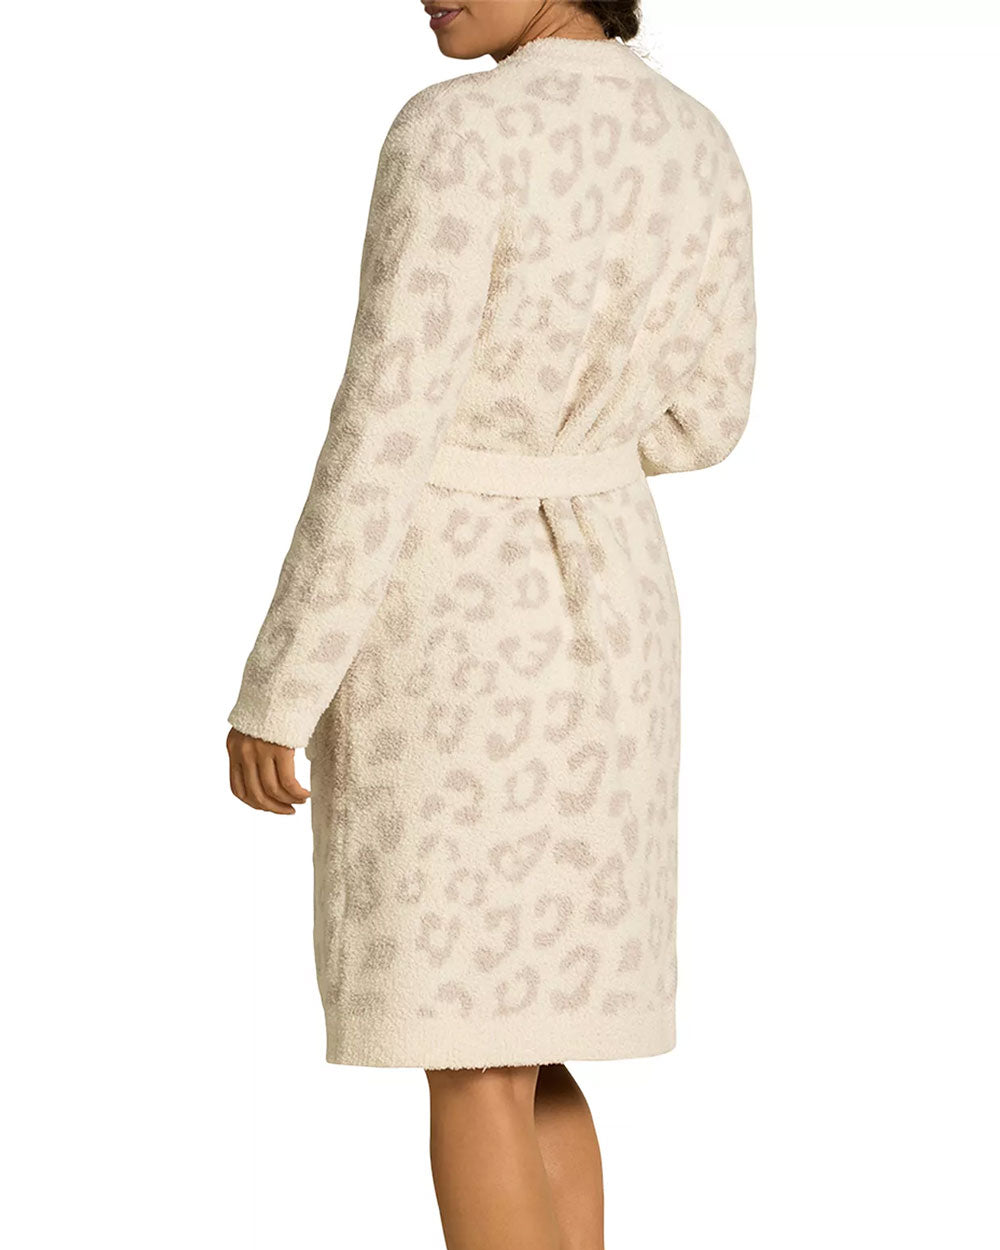 Cream and Stone Cozy Chic Barefoot in the Wild Robe